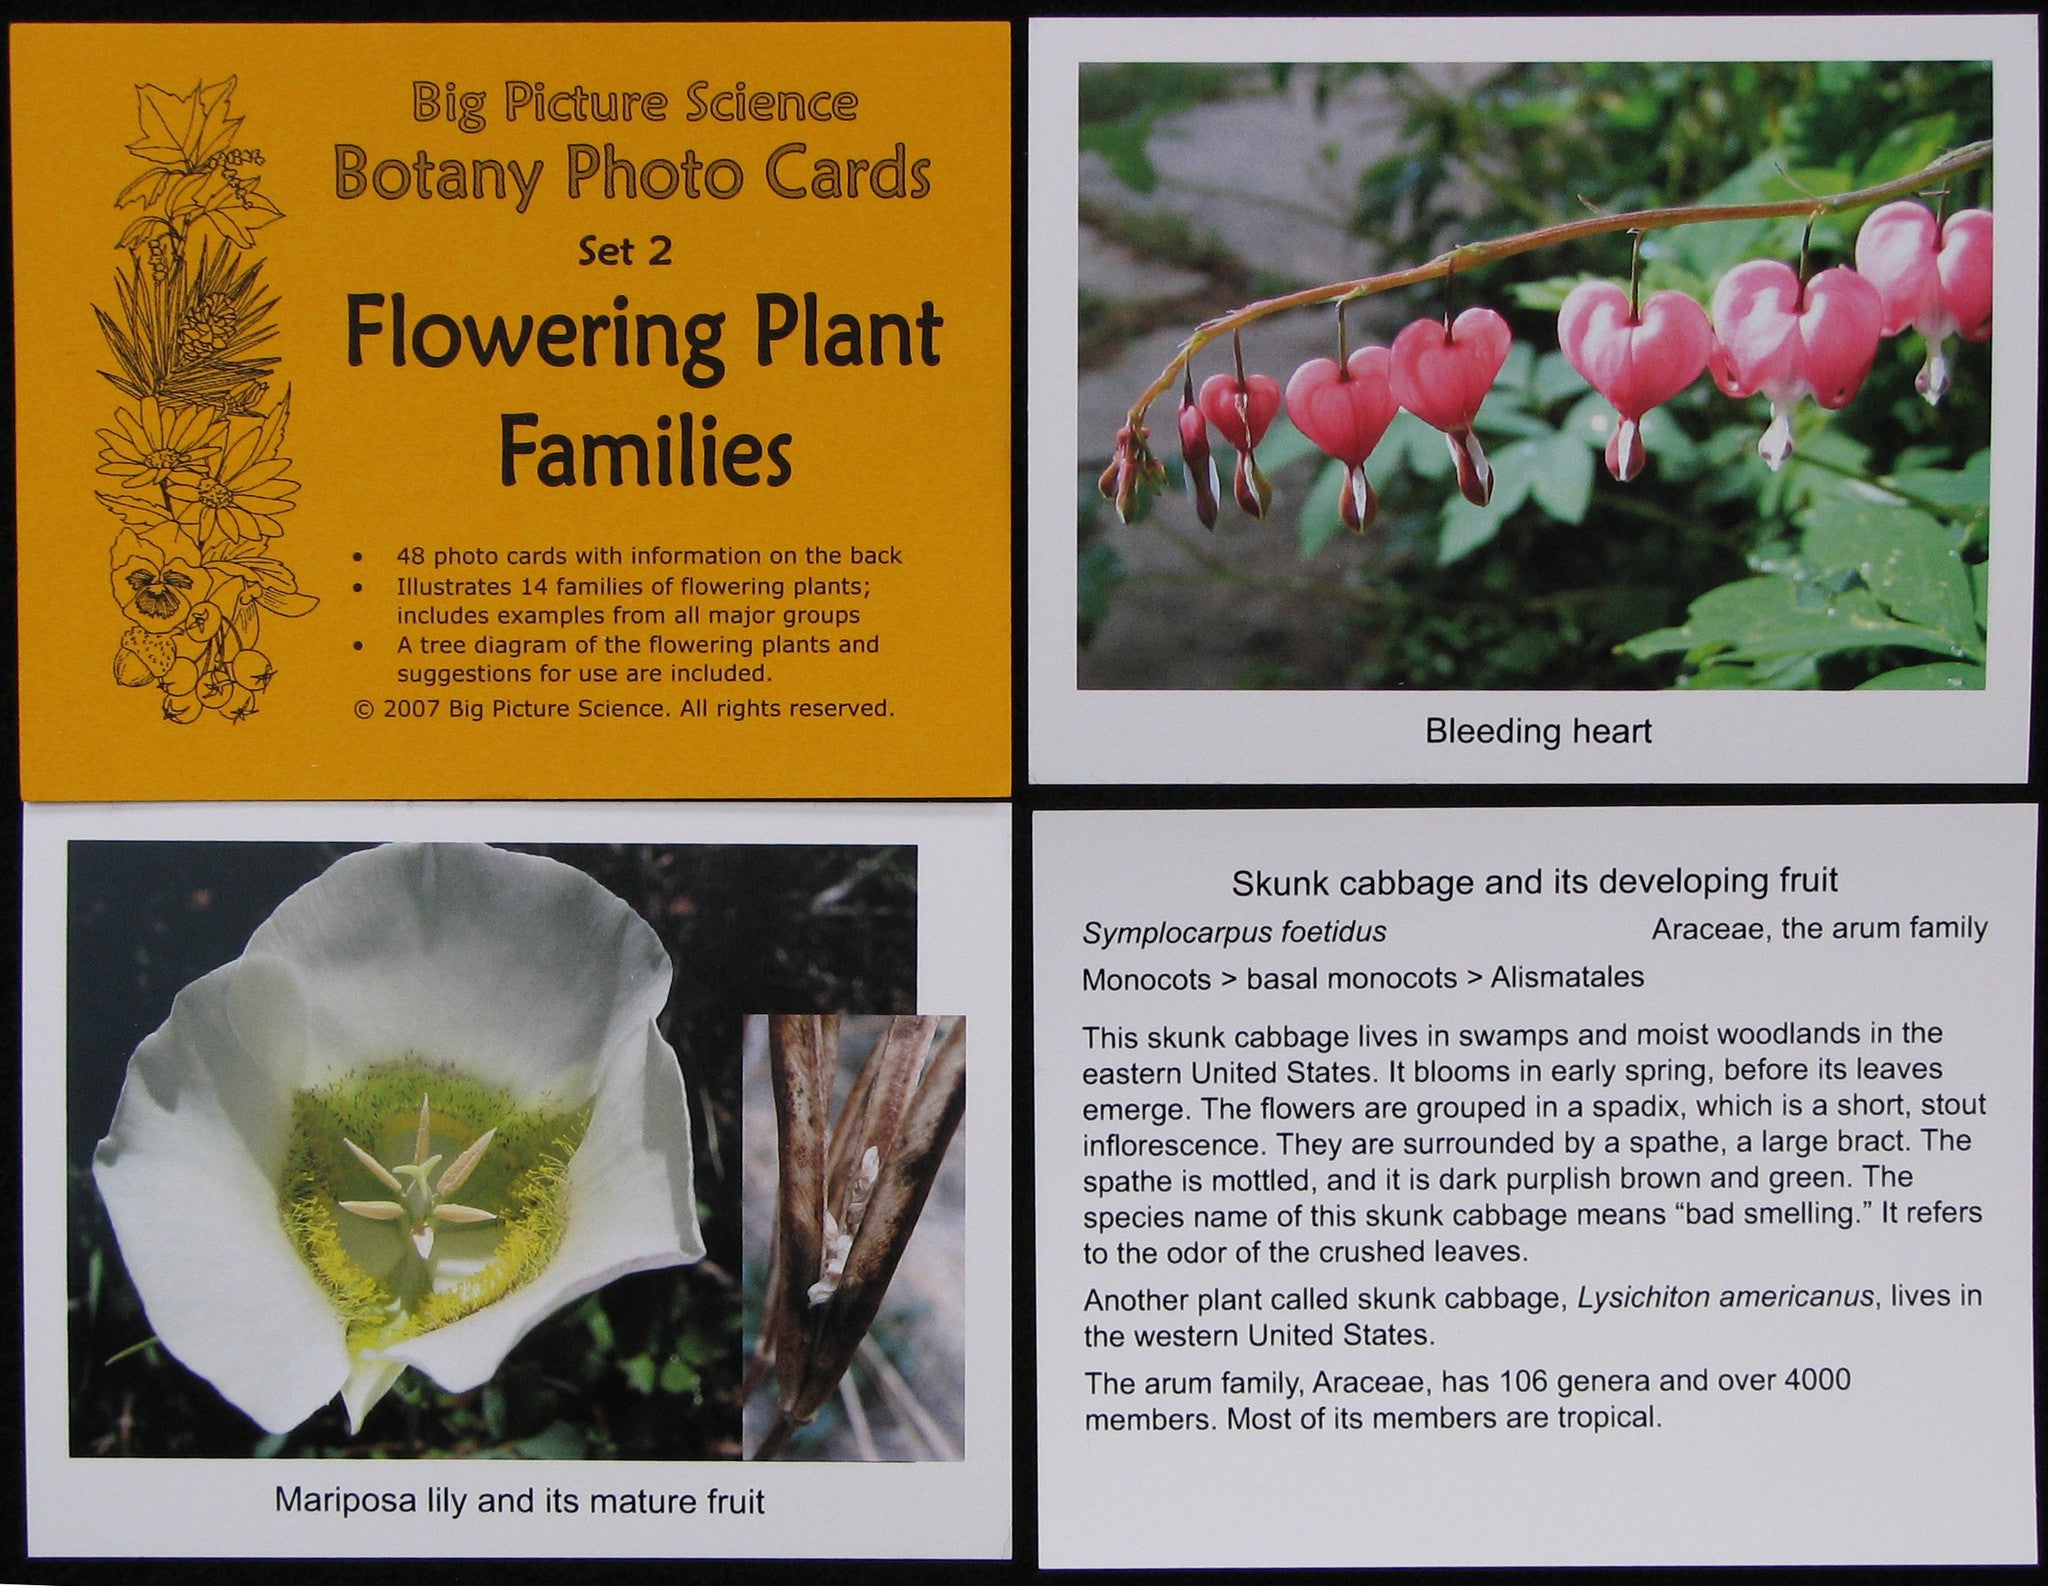 Flowering Plant Families photocard set from Big Picture Science